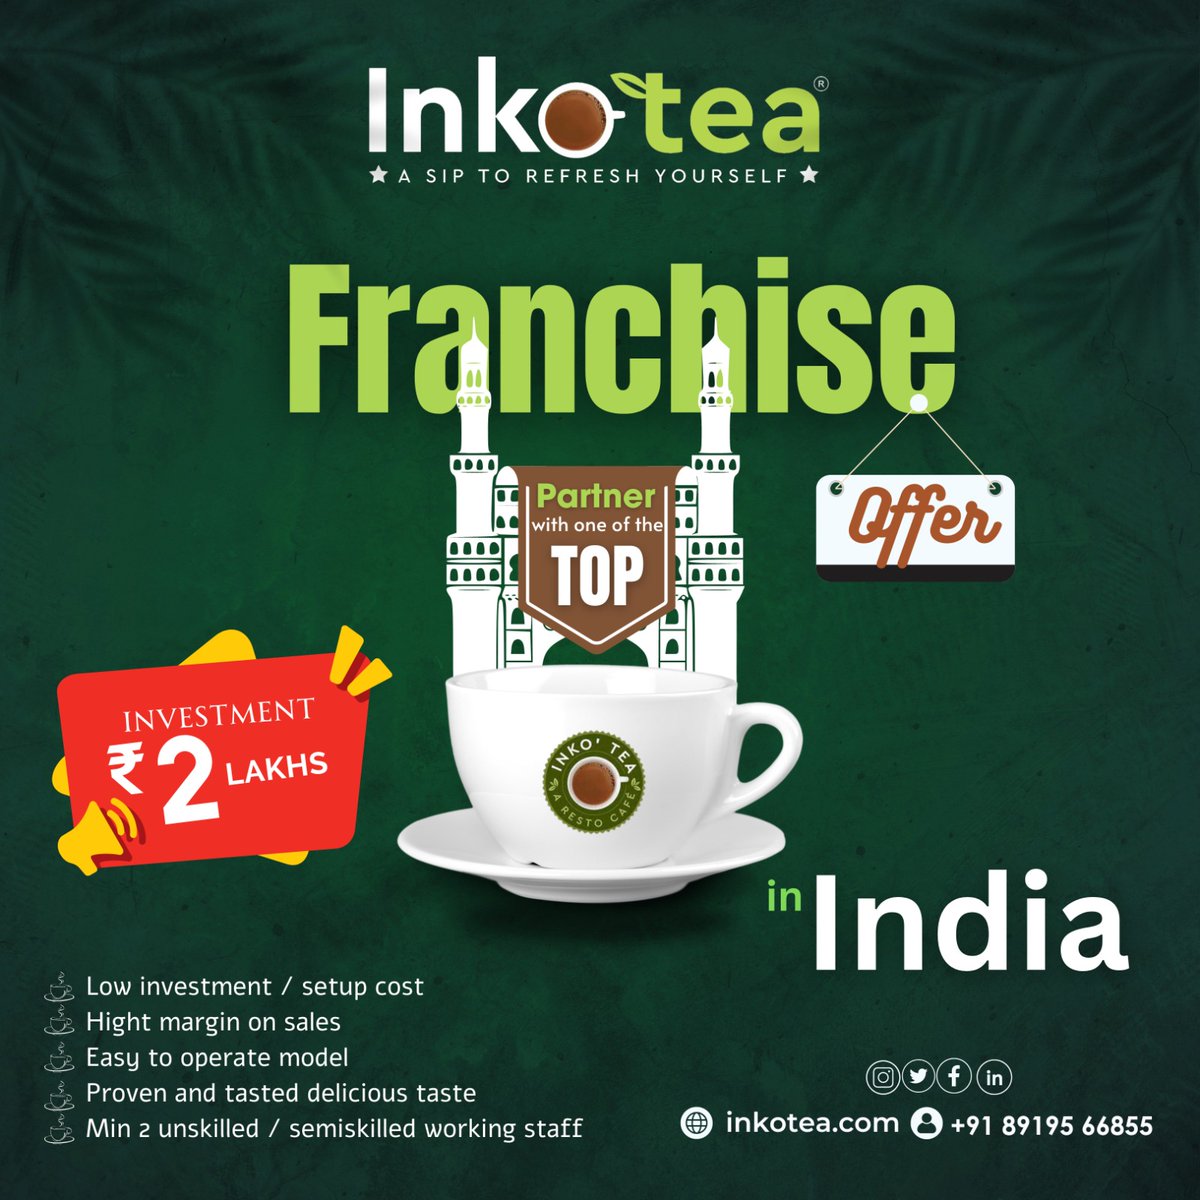 🌟 Ready for a lucrative investment opportunity?

Look no further than Inkotea!  With low investment and high margins on sales, our franchise model offers a recipe for success. 

#Inkotea #blacktea #greentea #SavorTheSip #TeaFlavors #TeaExploration #TeaAdventures #TeaEnthusiast